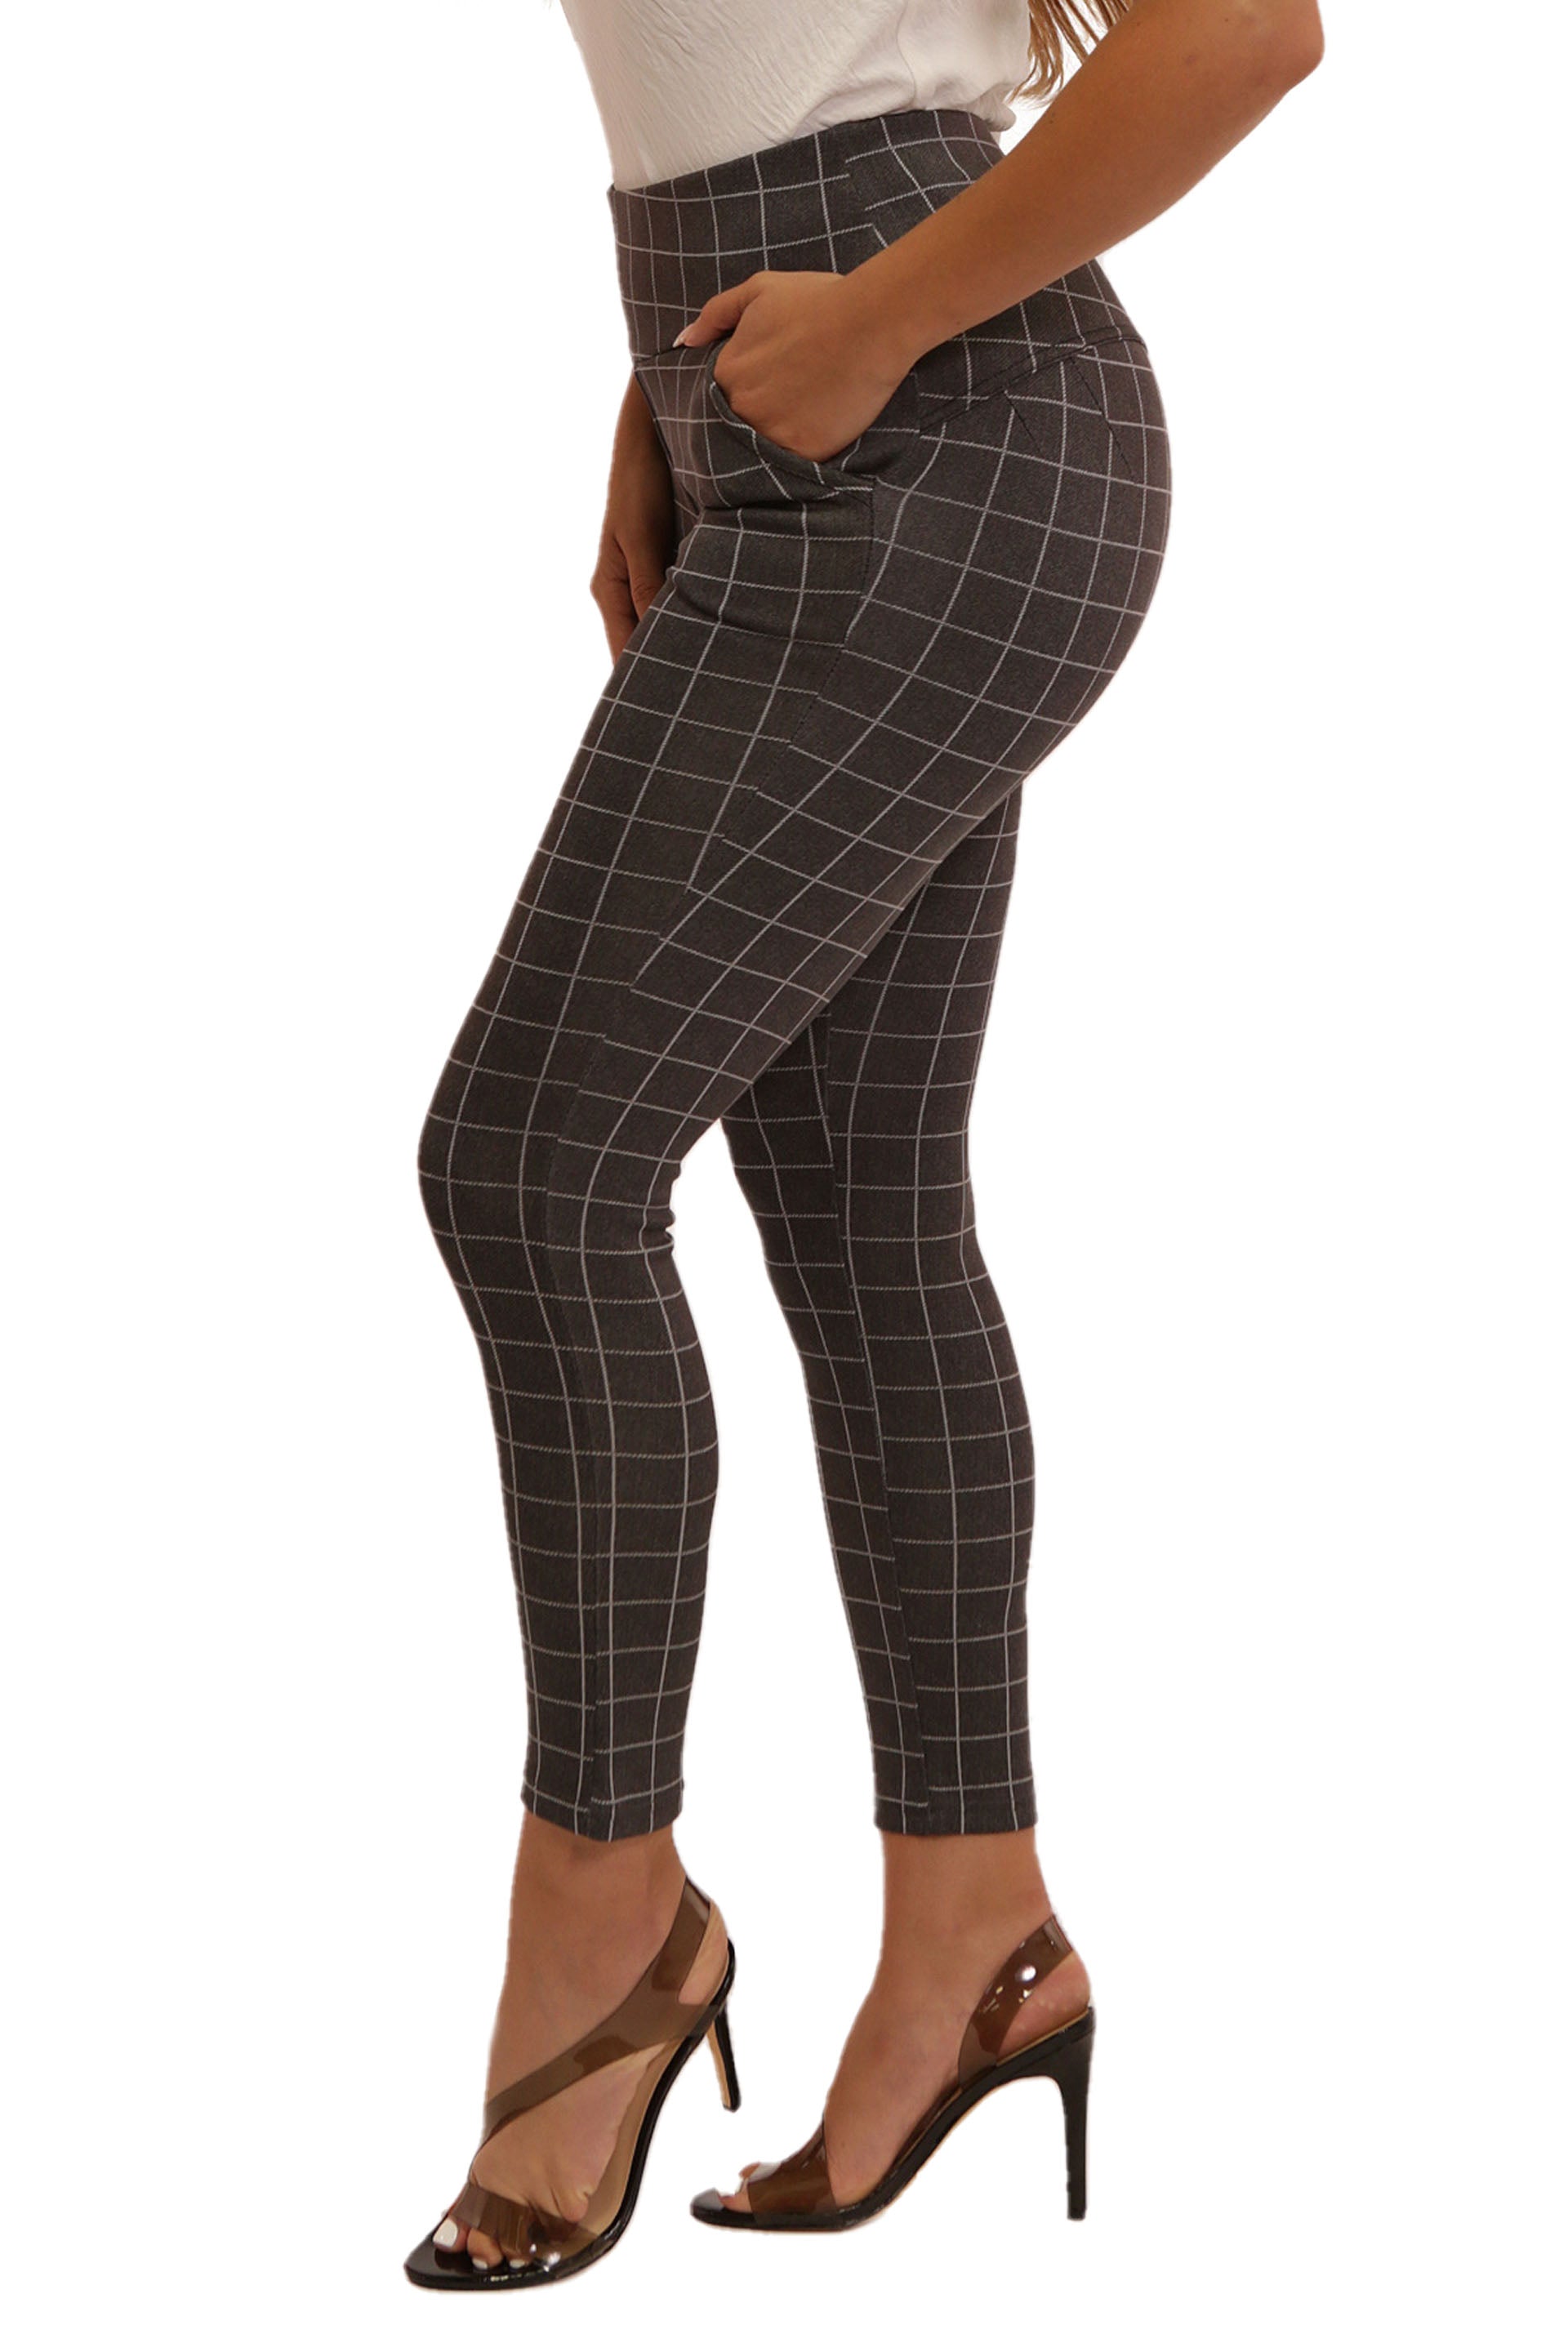 Wholesale Womens High Waist Sculpting Treggings With Front Pockets - Grey & White Plaid